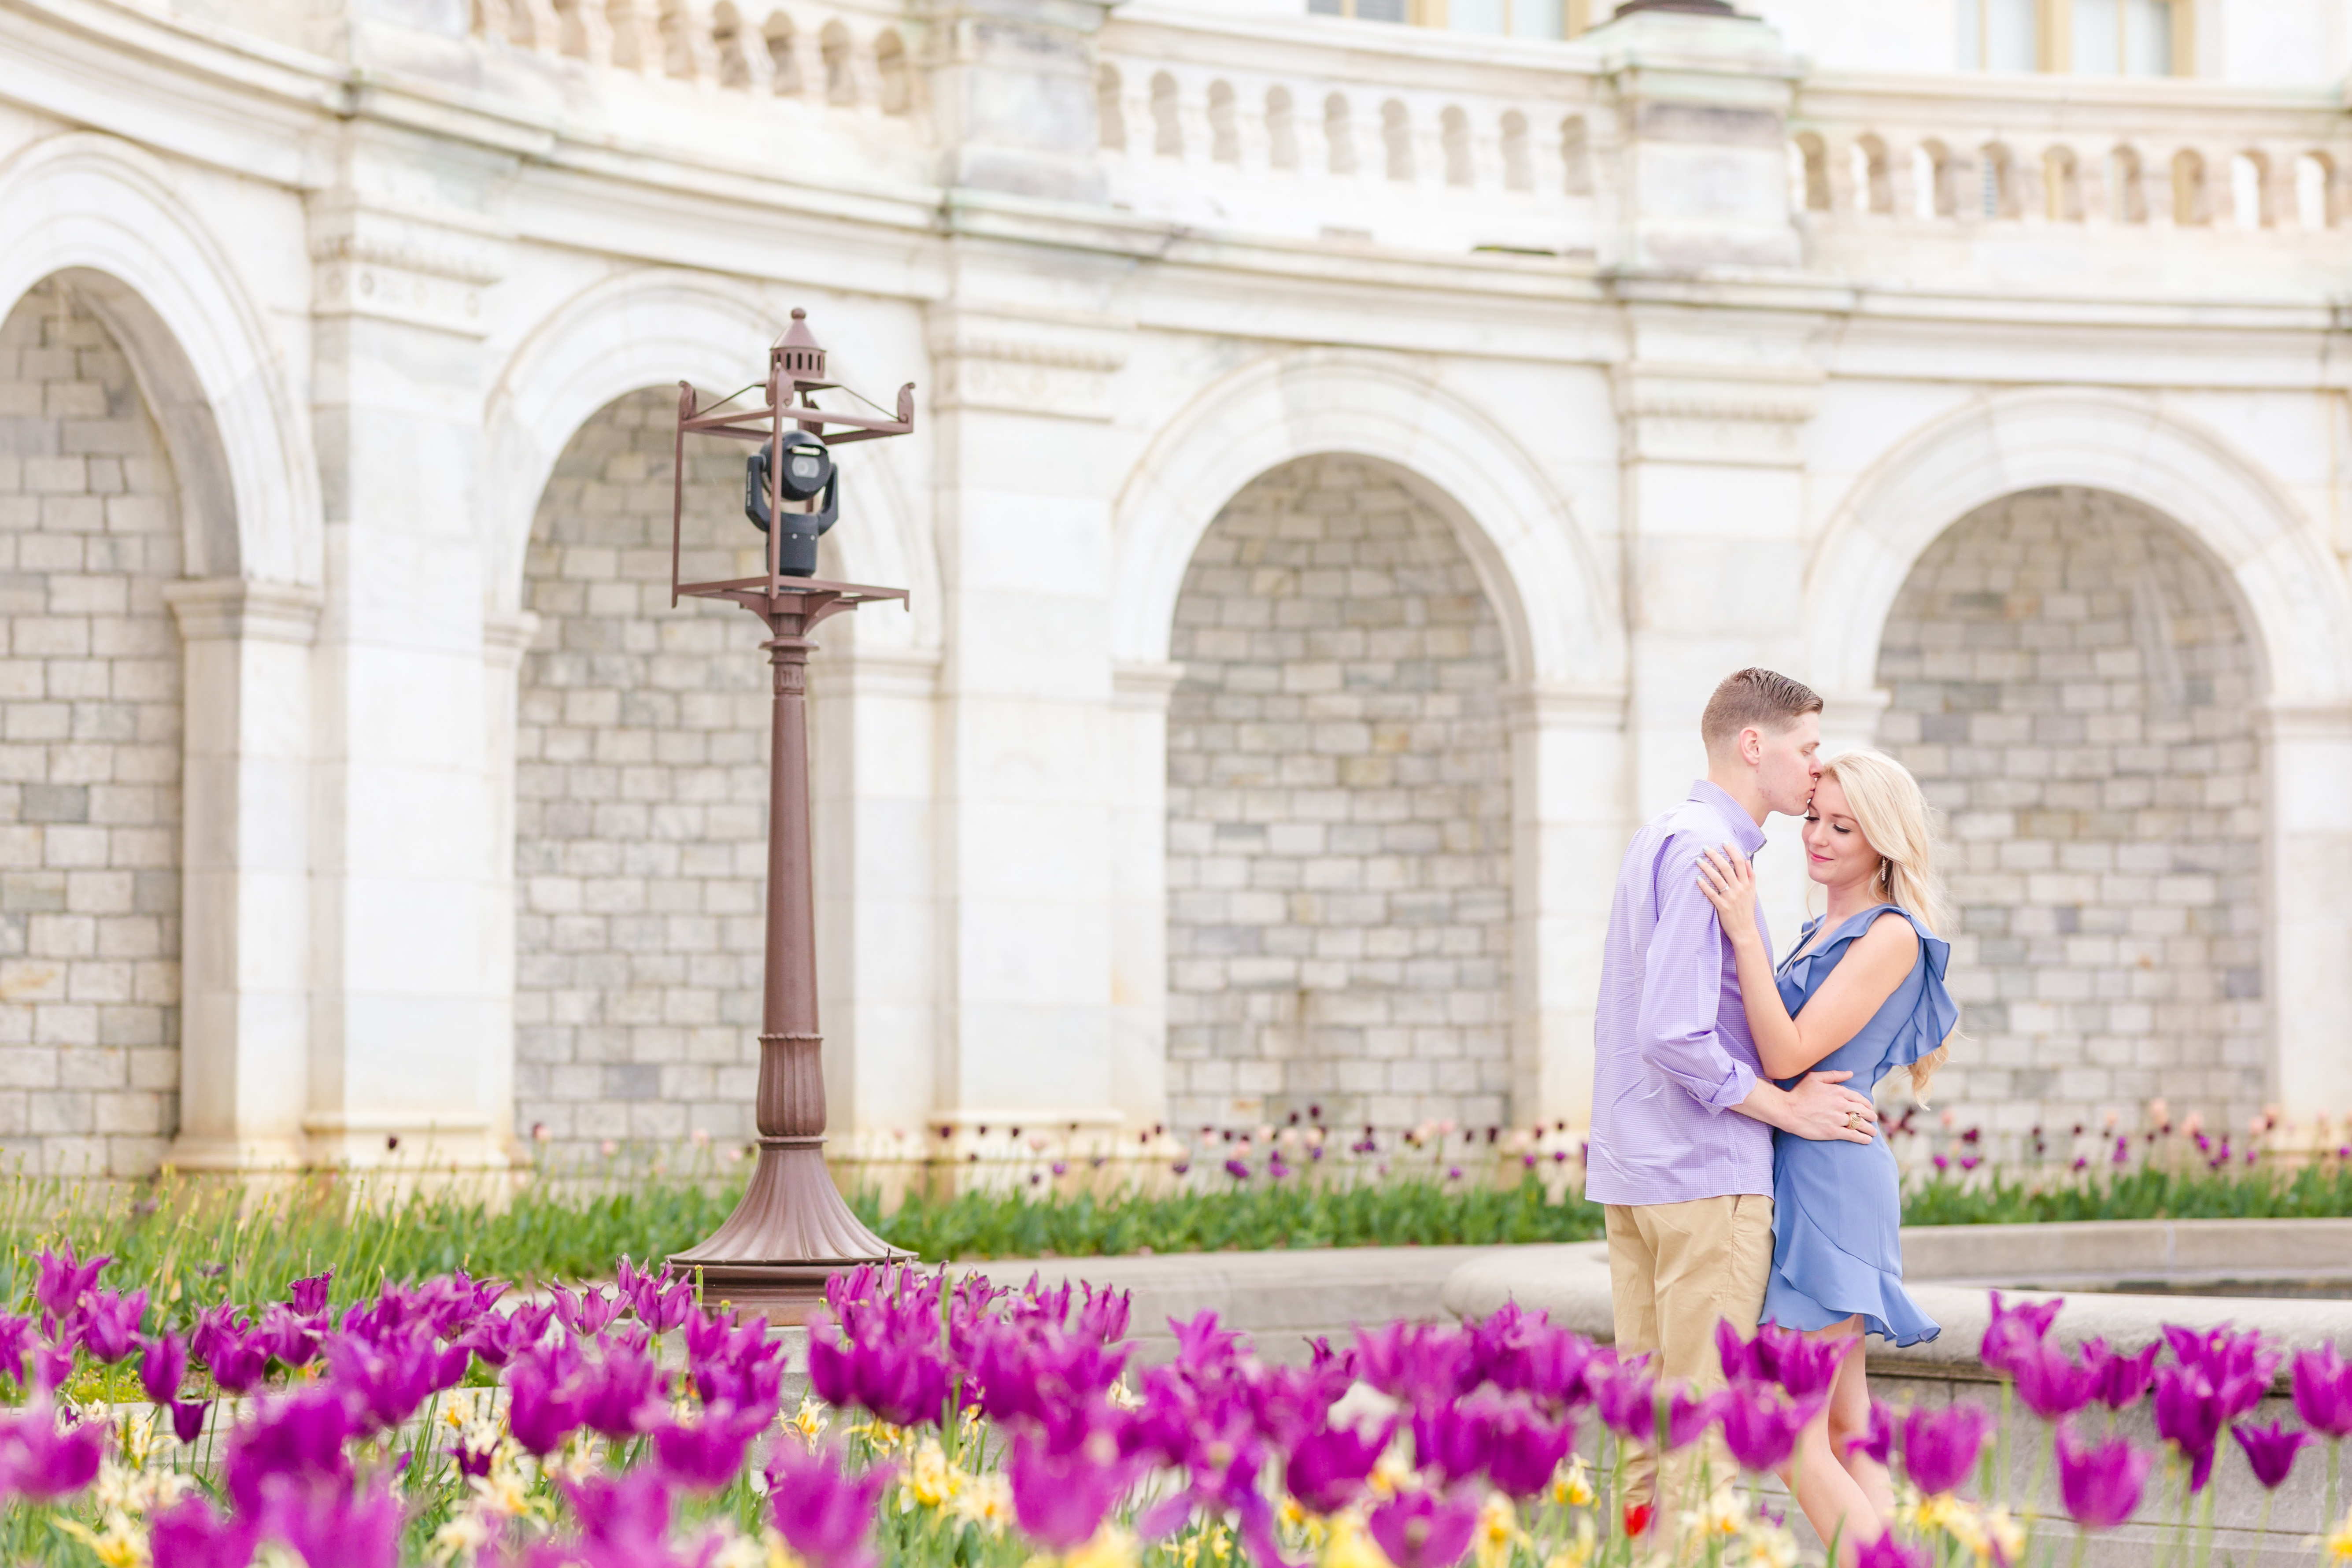 couple facing eachother, guy kissing girl on forehead in front of capitol with tulips in foreground 